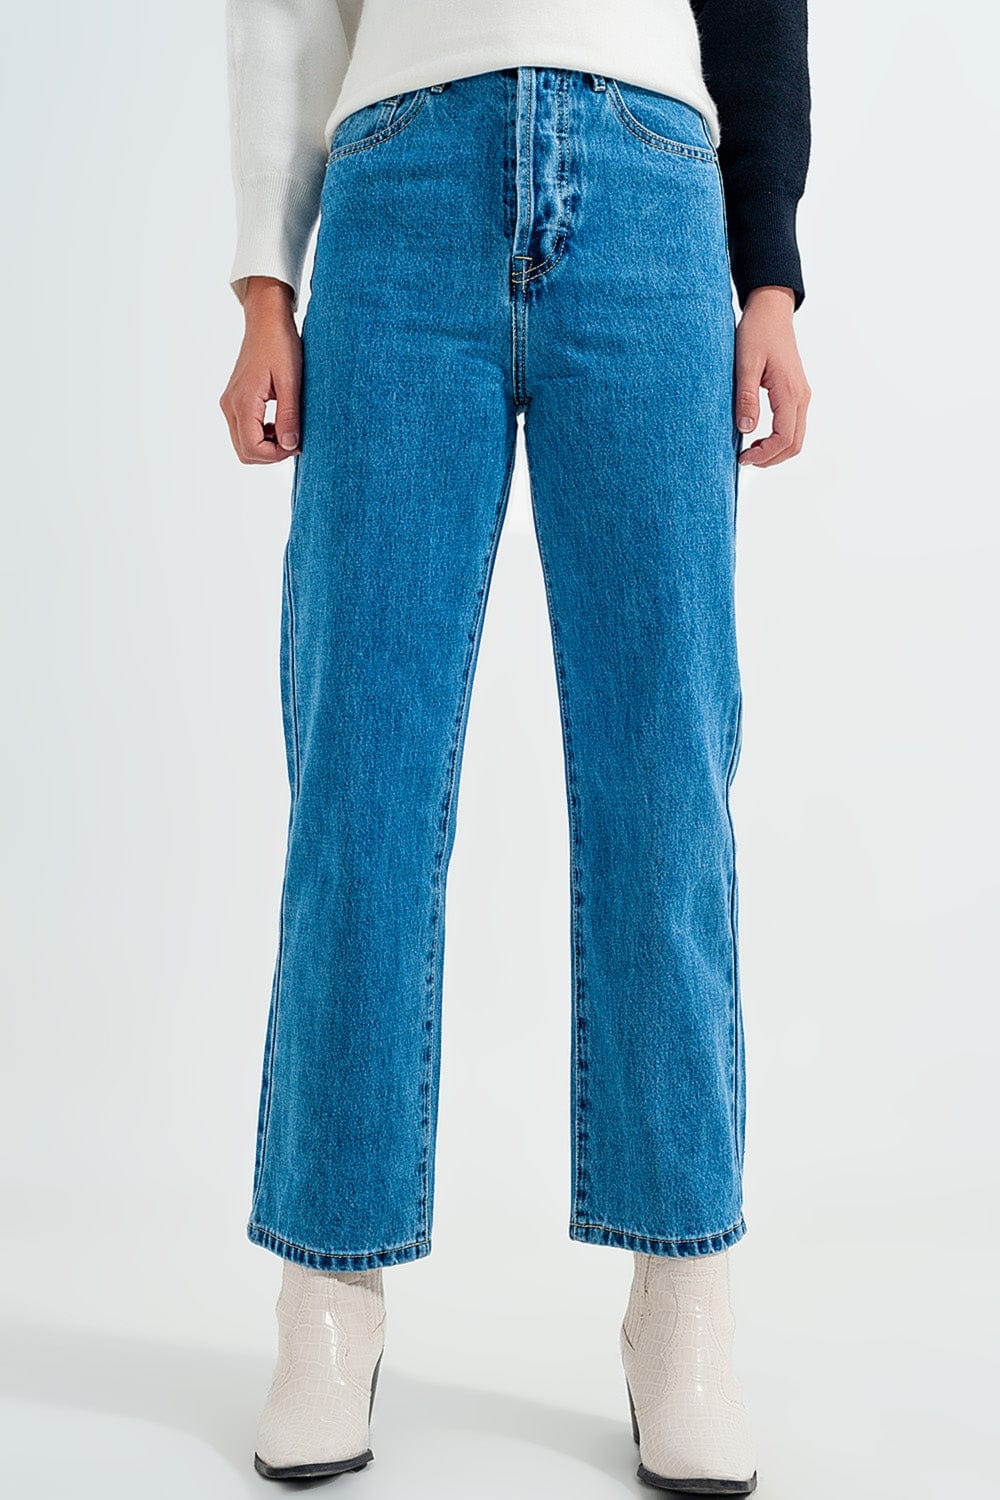 Q2 Women's Jean High Waisted Mom Jeans in Vintage Blue